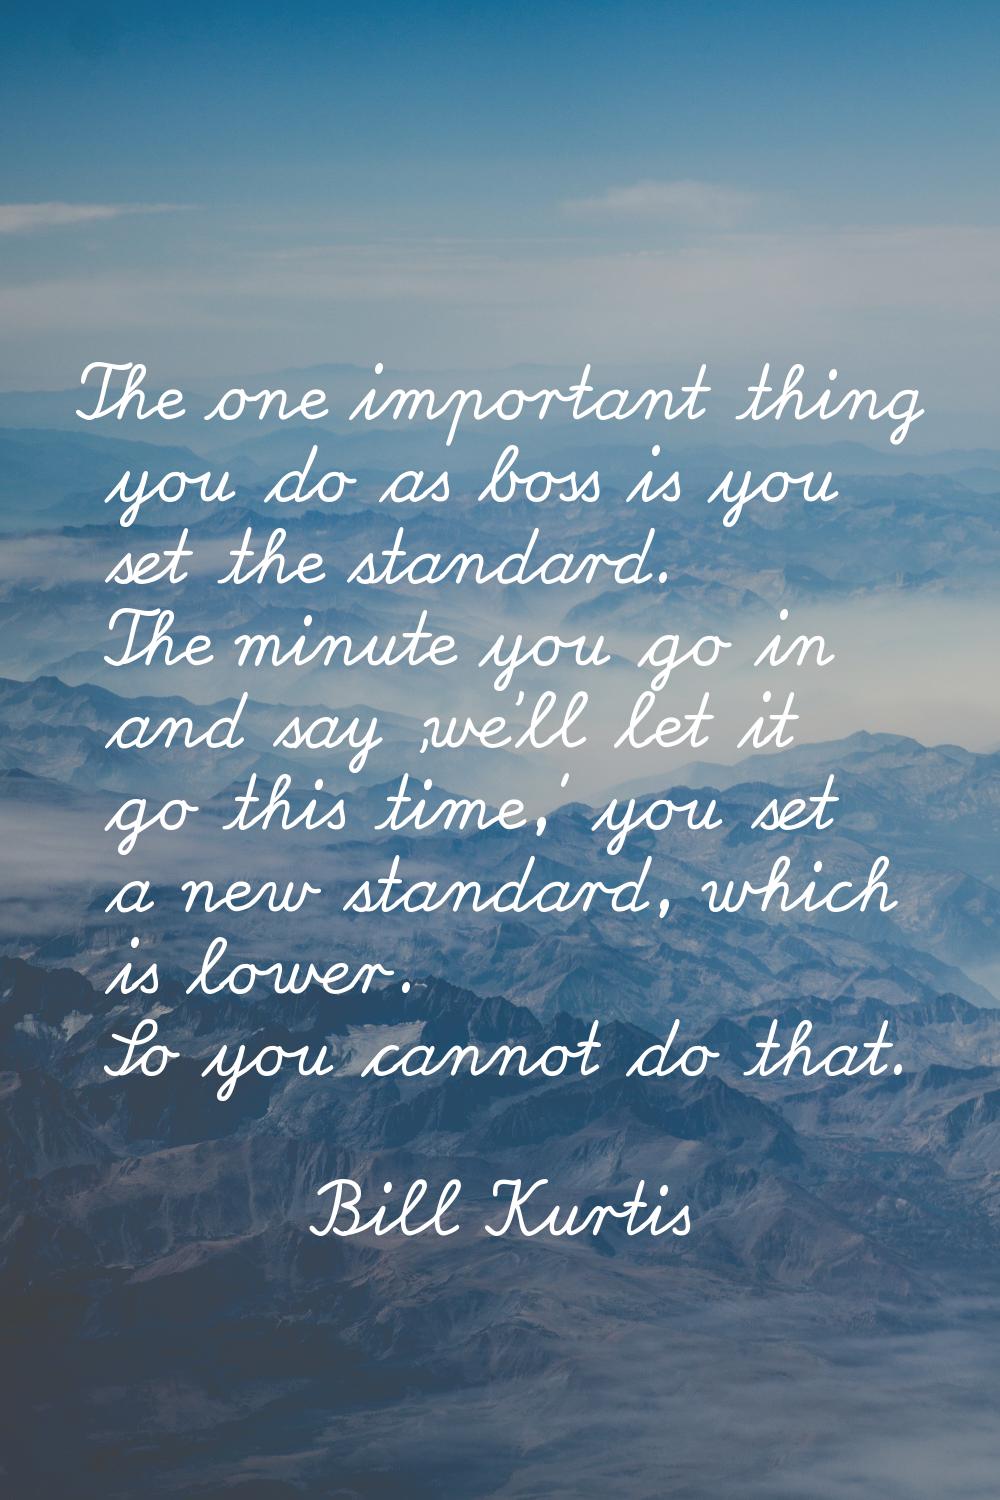 The one important thing you do as boss is you set the standard. The minute you go in and say 'we'll